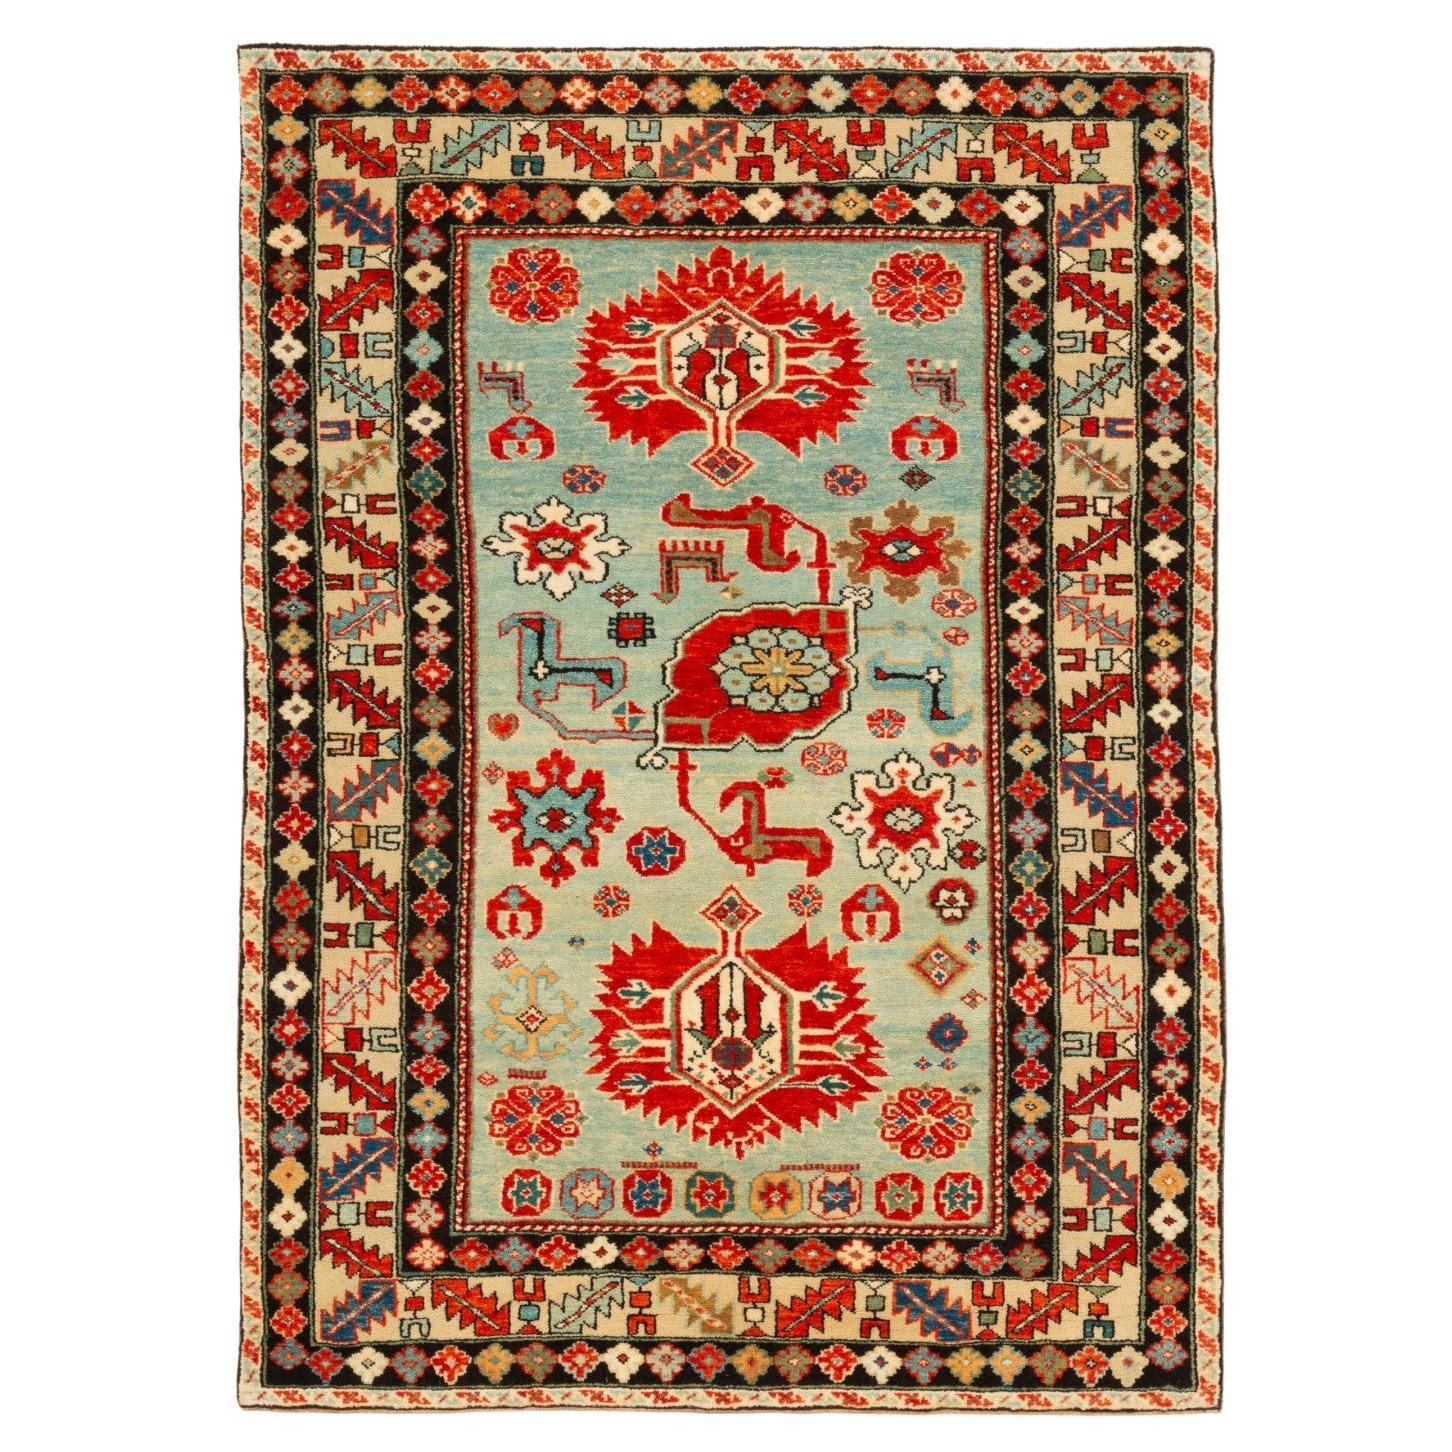 Ararat Rugs Kuba Rug with Palmettes Caucasian 19th C. Revival Rug, Natural Dyed For Sale